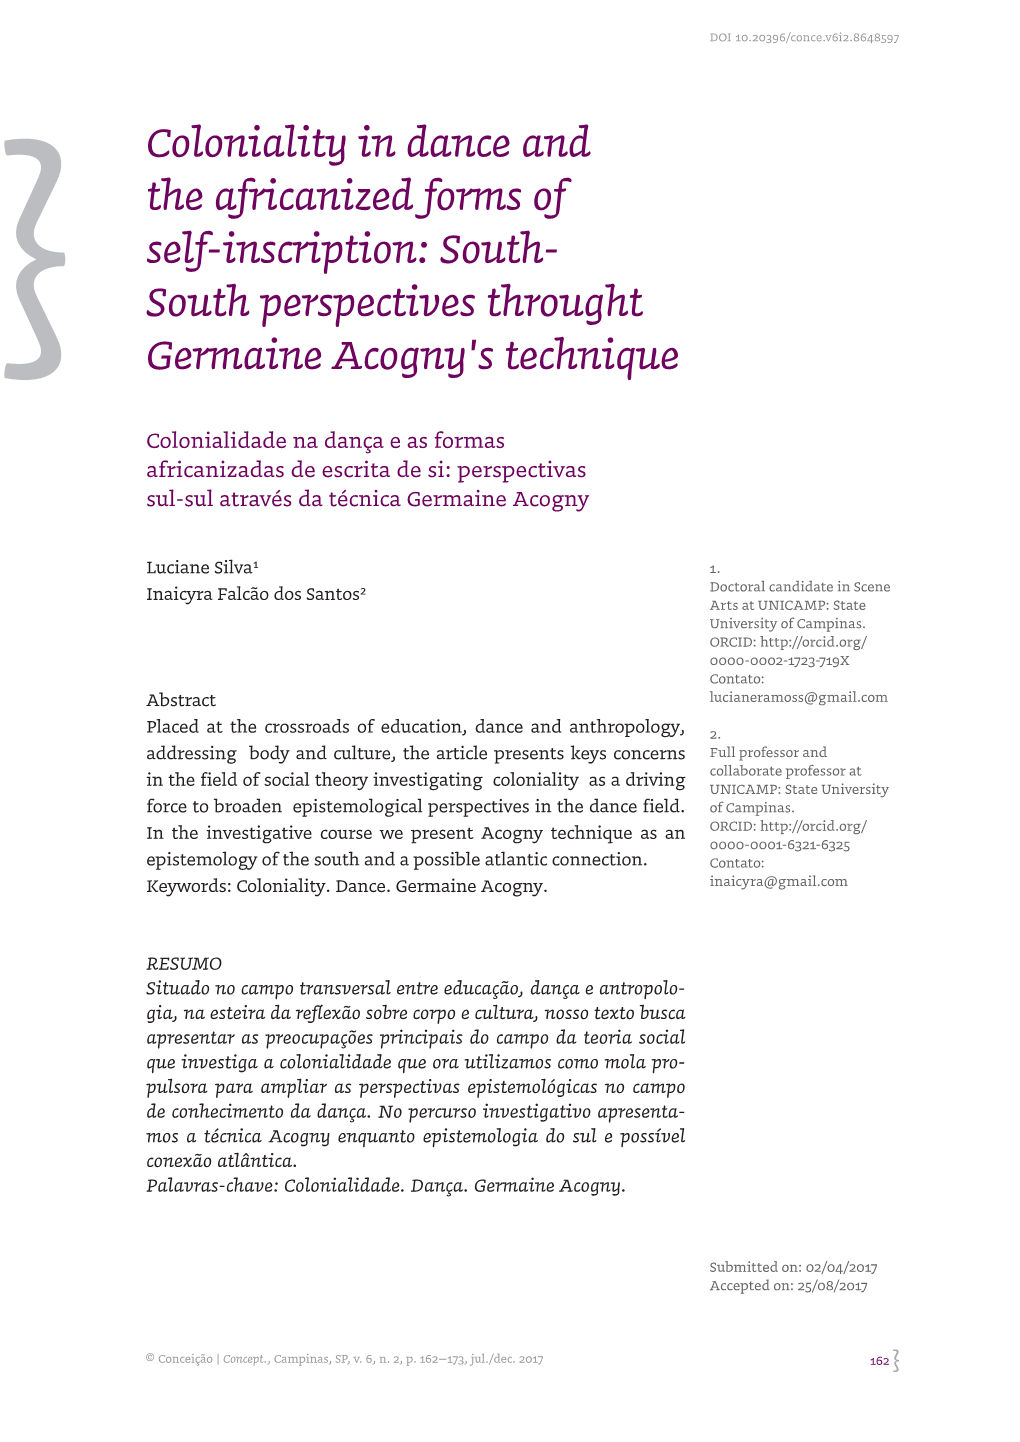 Coloniality in Dance and the Africanized Forms of Self-Inscription: South- South Perspectives Throught Germaine Acogny's Technique